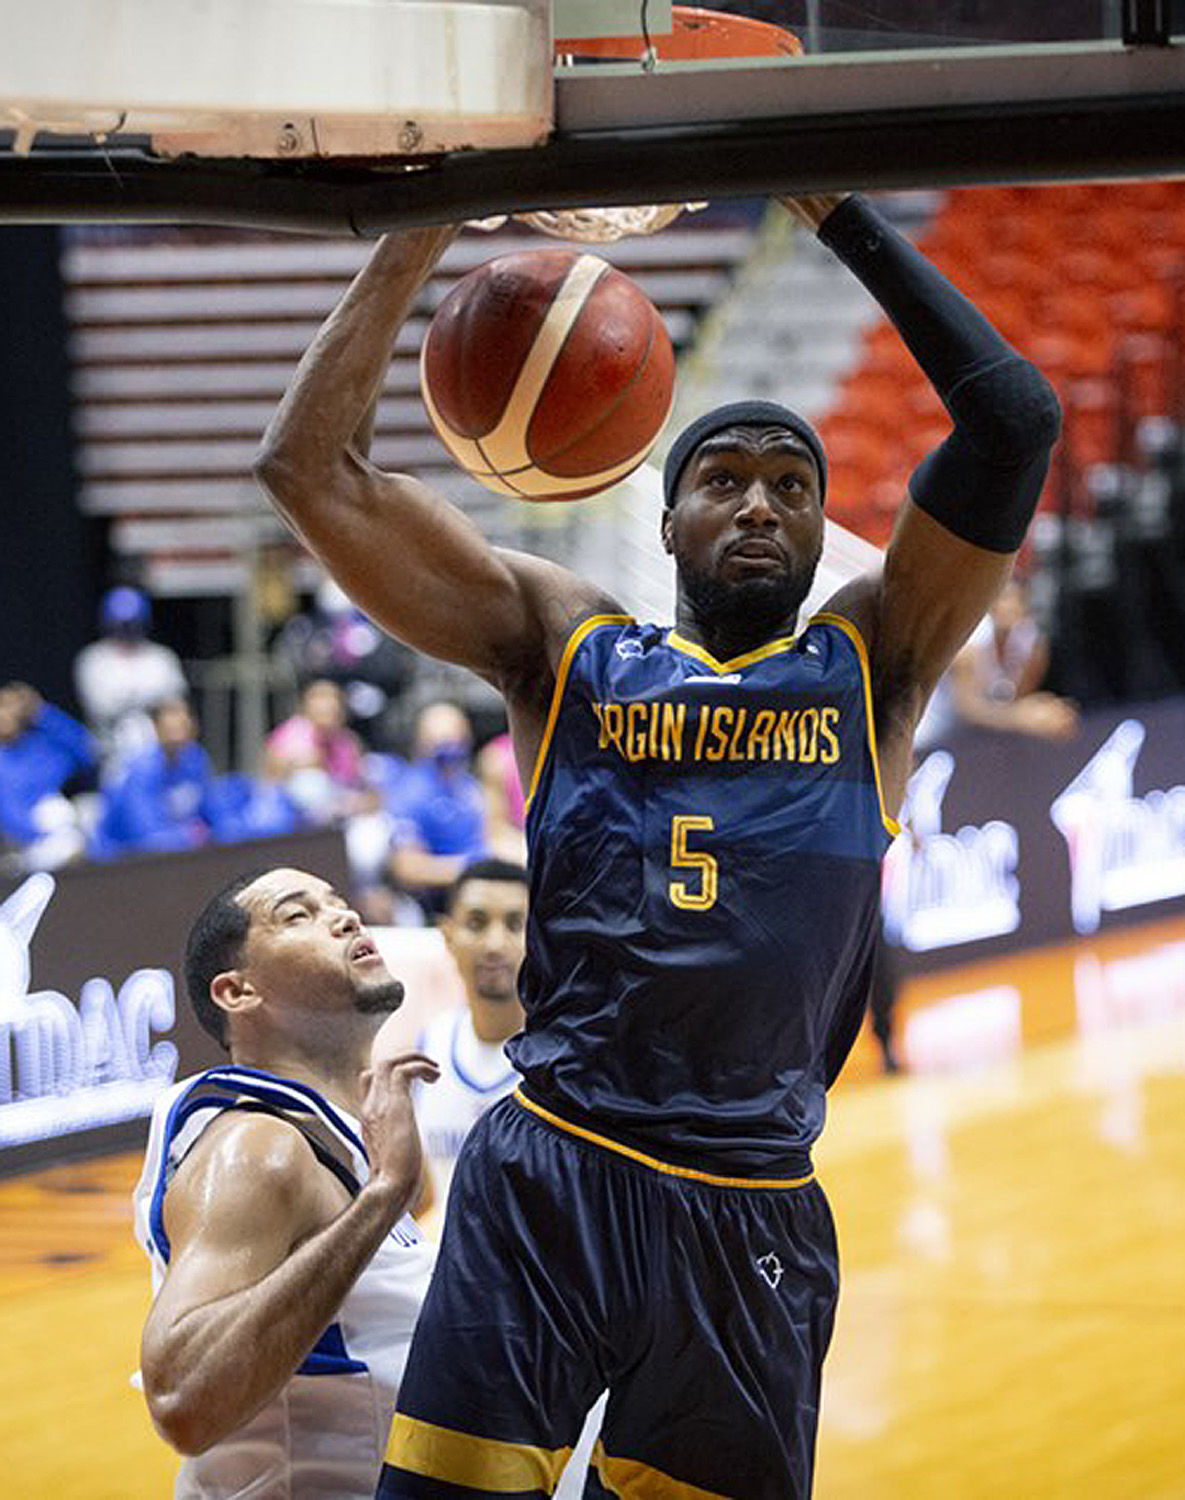 FIX IS IN! After 3 Straight Losses, USVI Team Earns A Berth In Next Year's FIBA AmeriCup Tournament